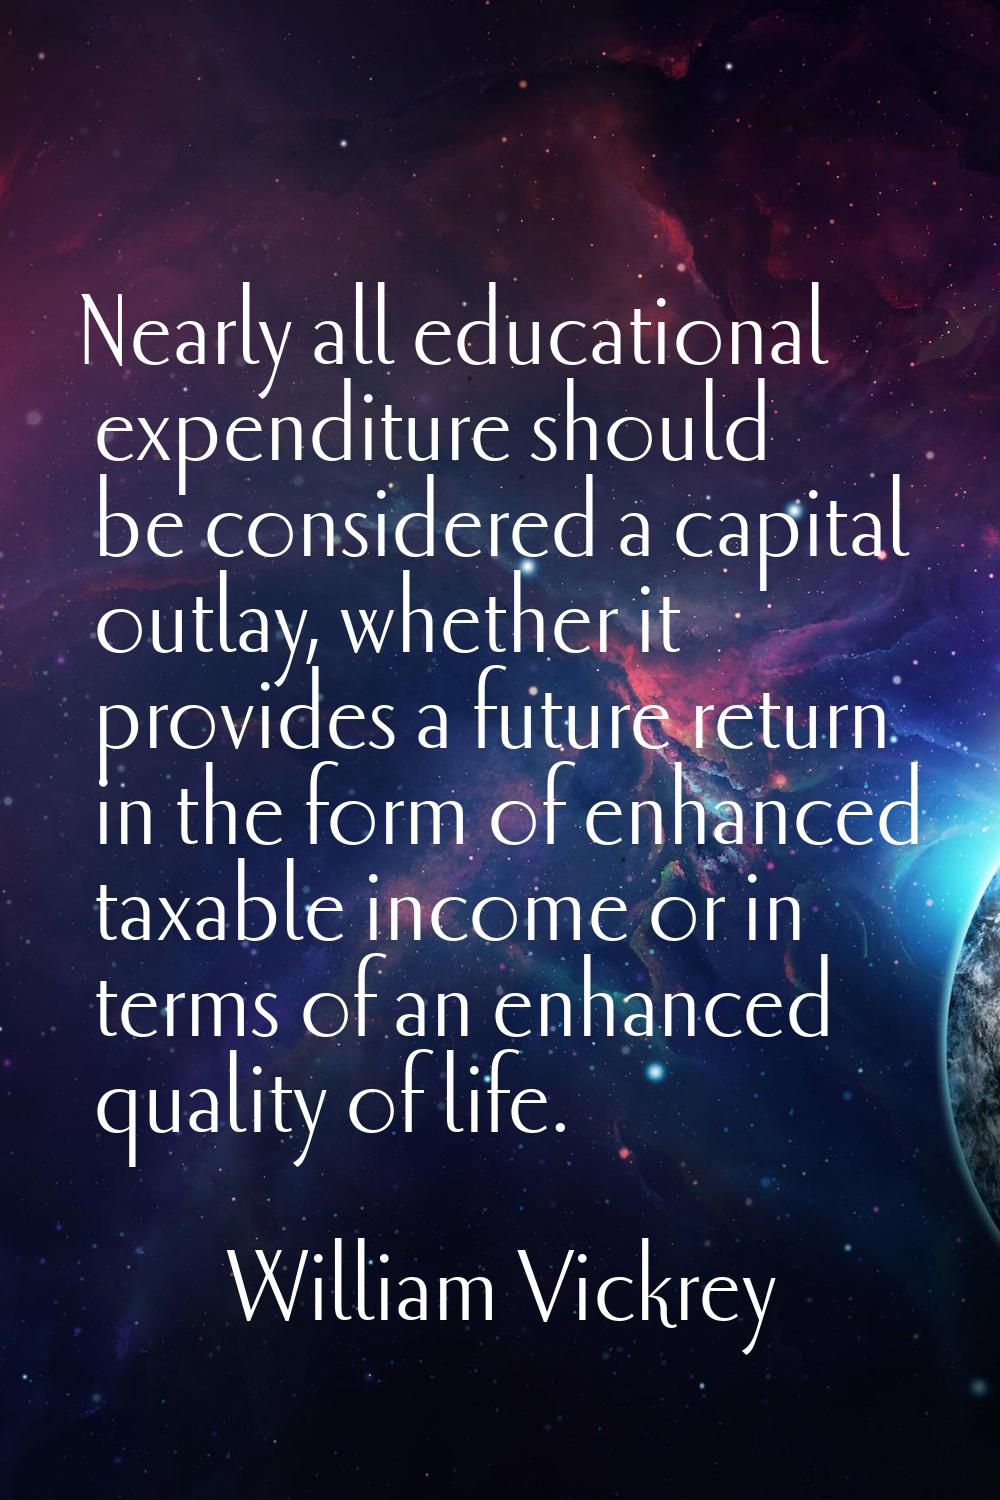 Nearly all educational expenditure should be considered a capital outlay, whether it provides a fut